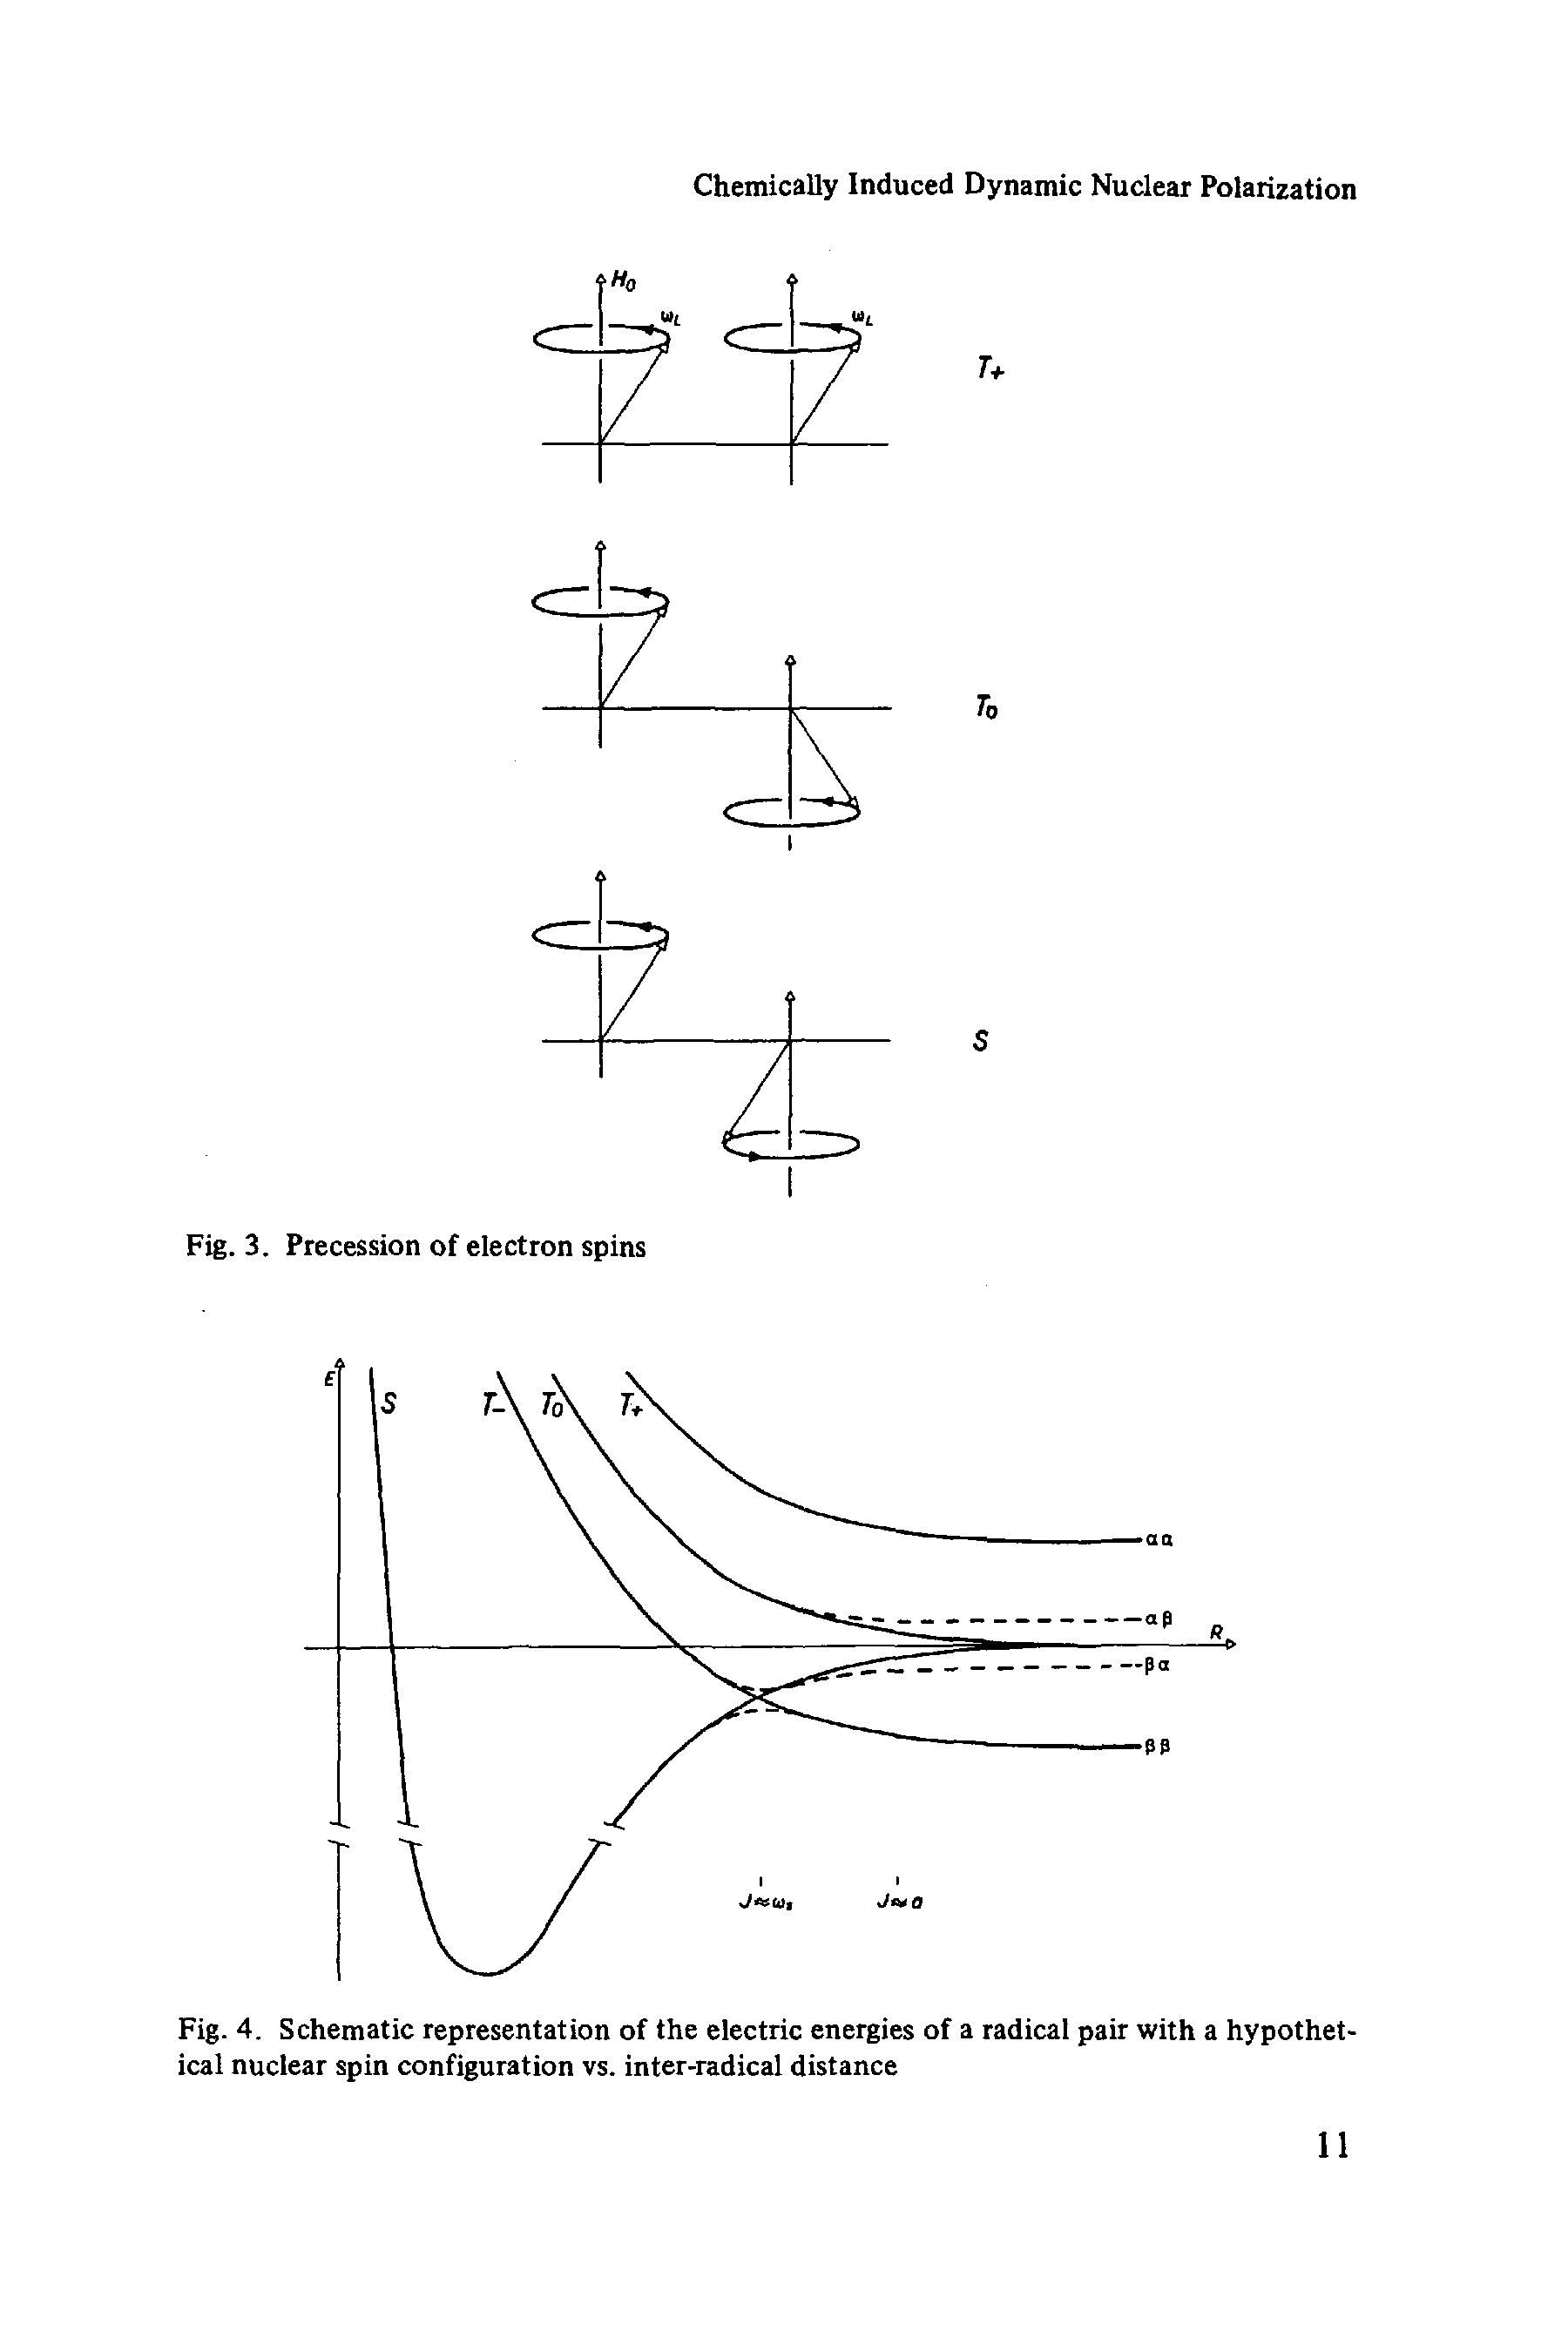 Fig. 4. Schematic representation of the electric energies of a radical pair with a hypothetical nuclear spin configuration vs. inter-radical distance...